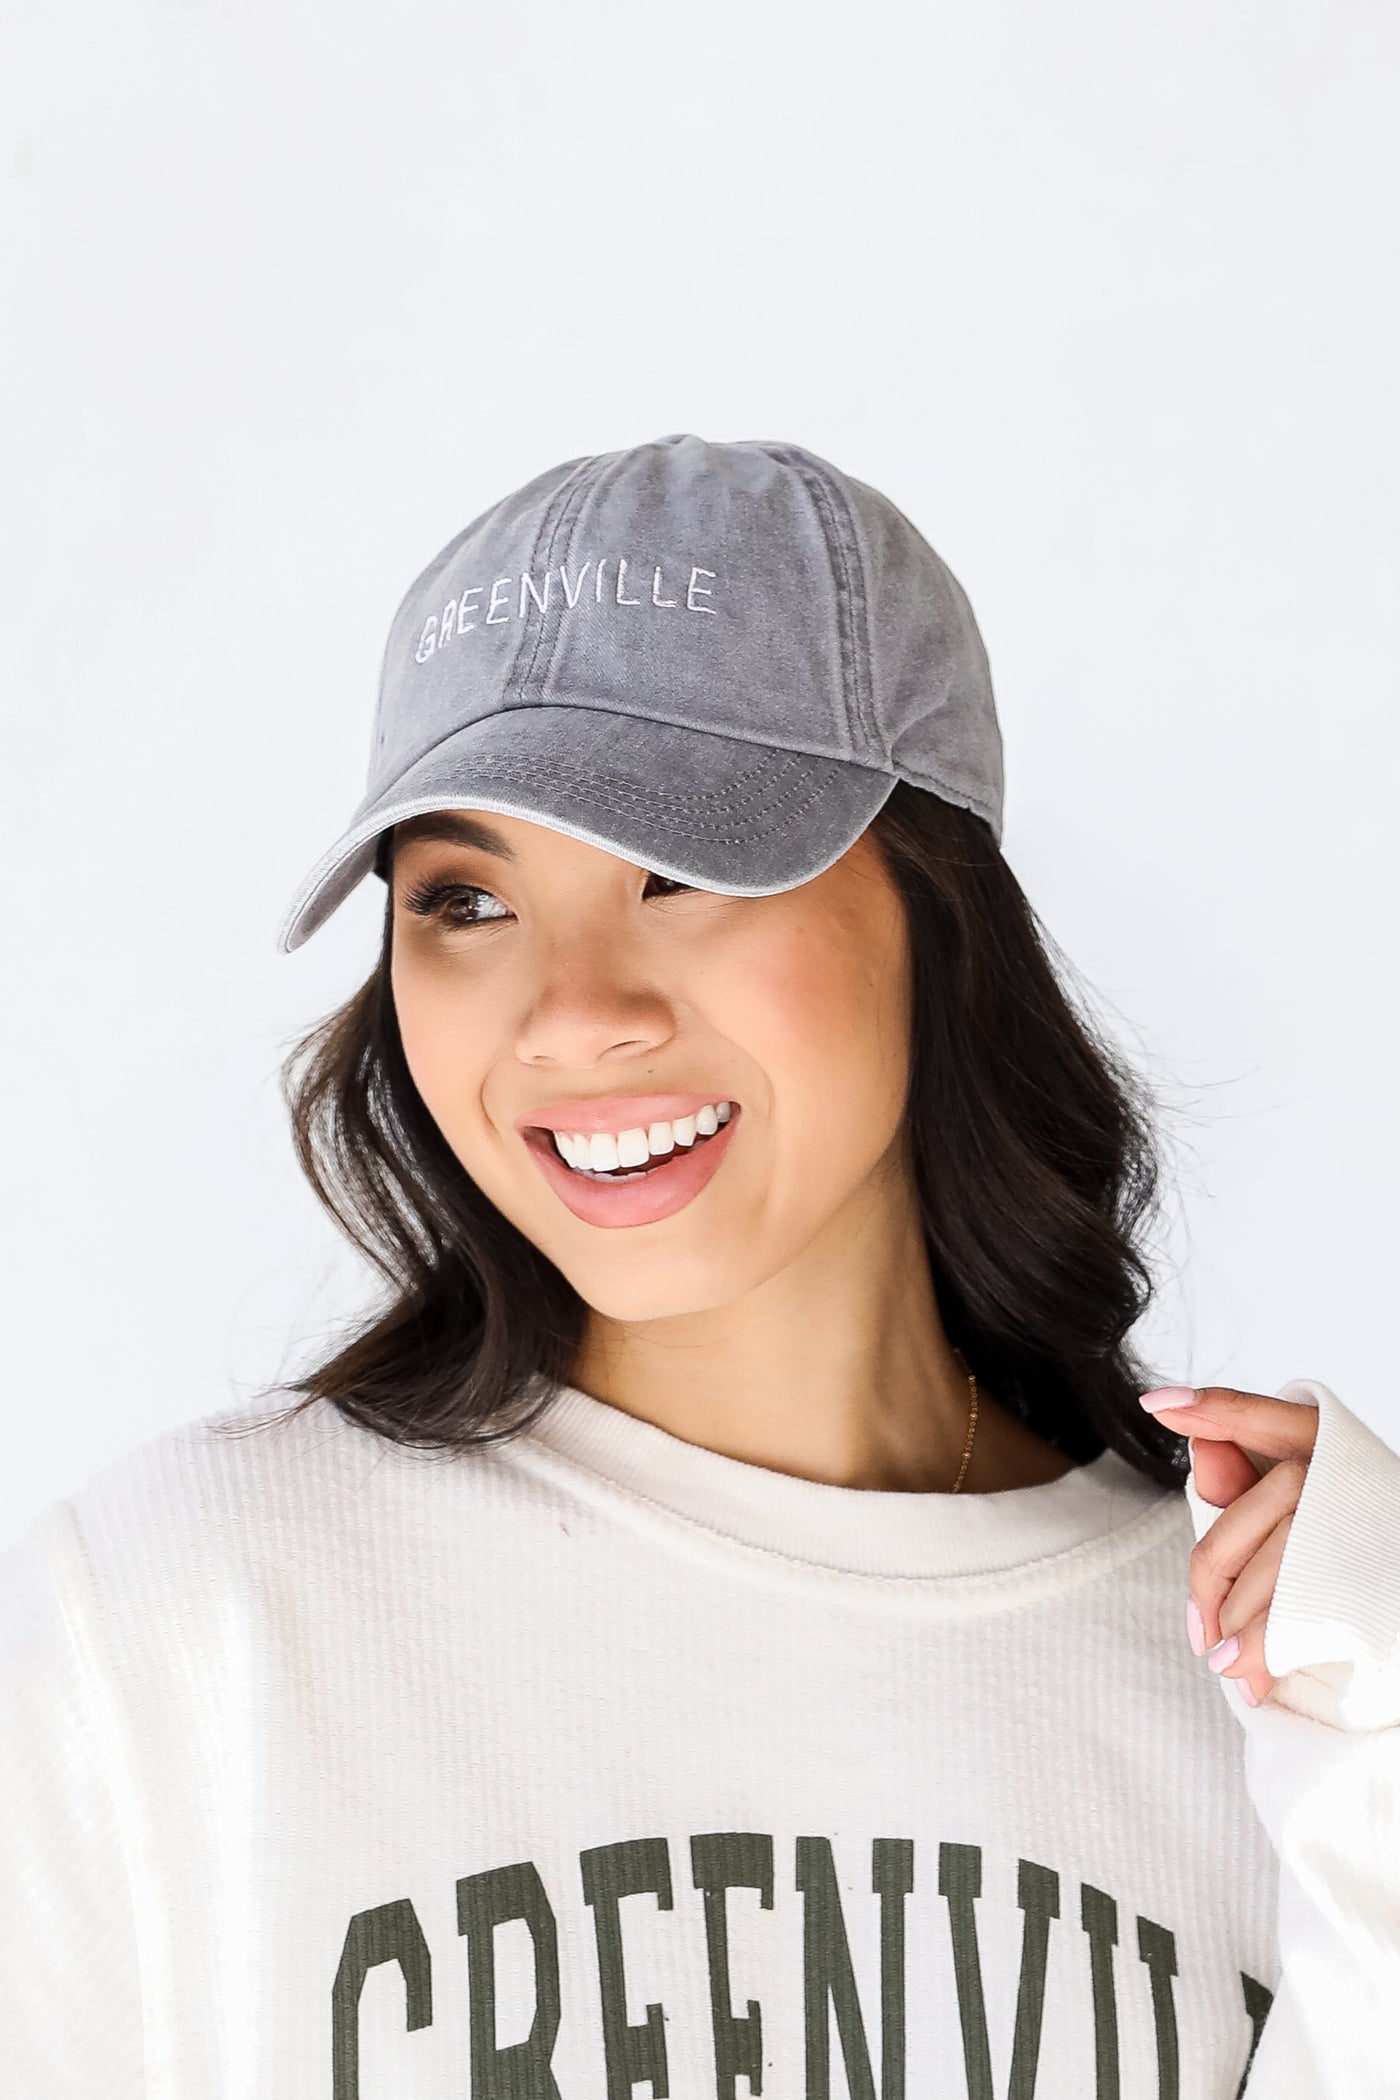 Greenville Embroidered Hat in grey front view